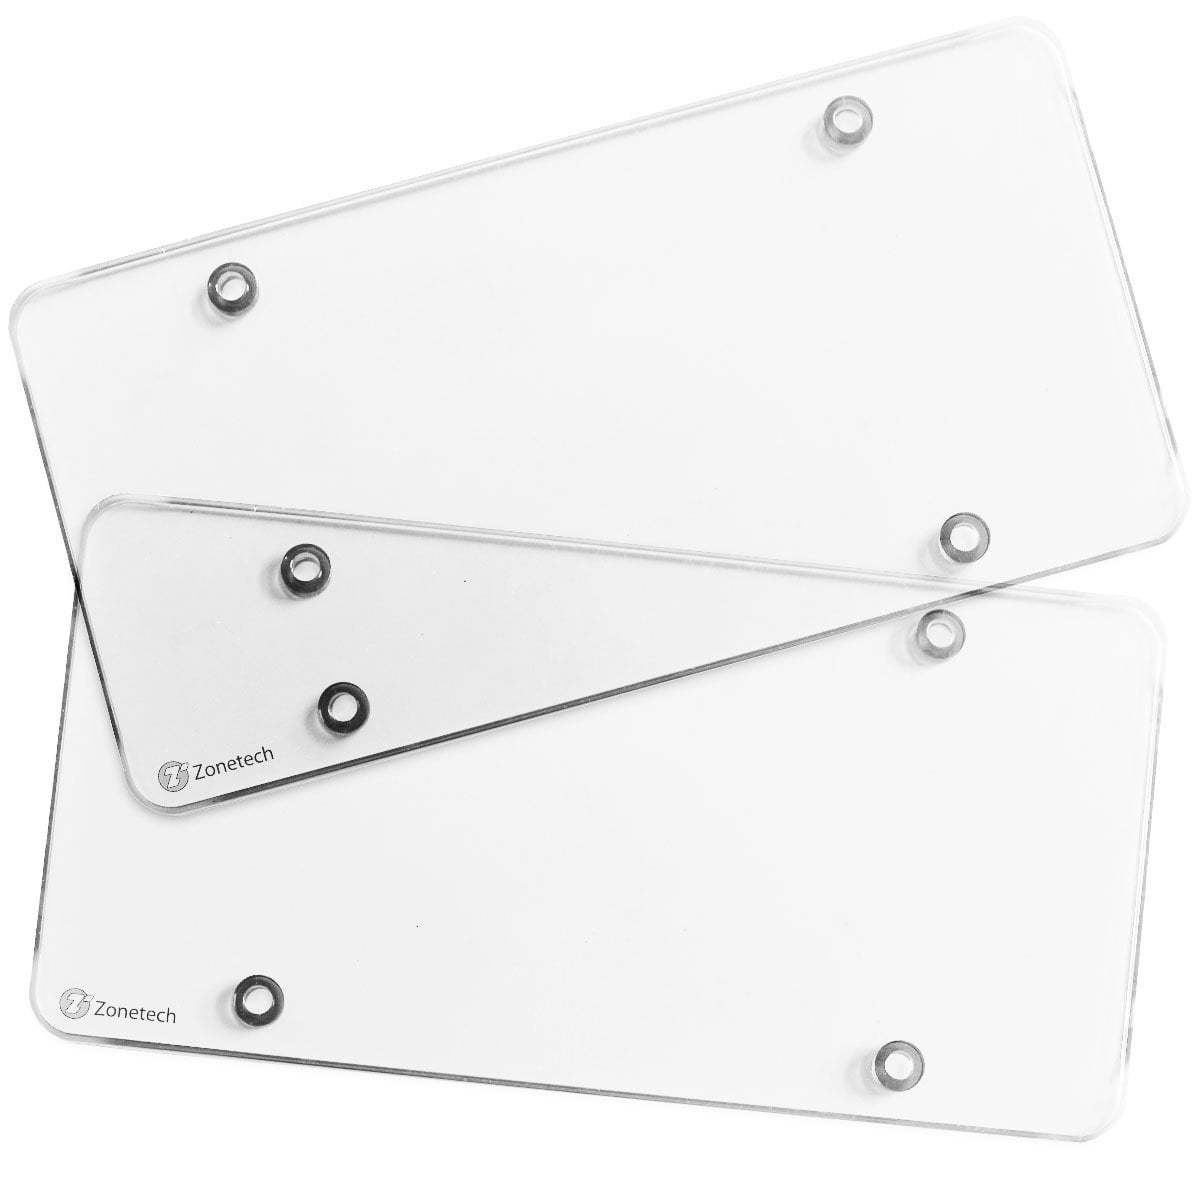 2-Pack Novelty/License Plate Clear Smoked Flat Thick Shields Zone Tech Clear Smoked Unbreakable License Plate Shields 